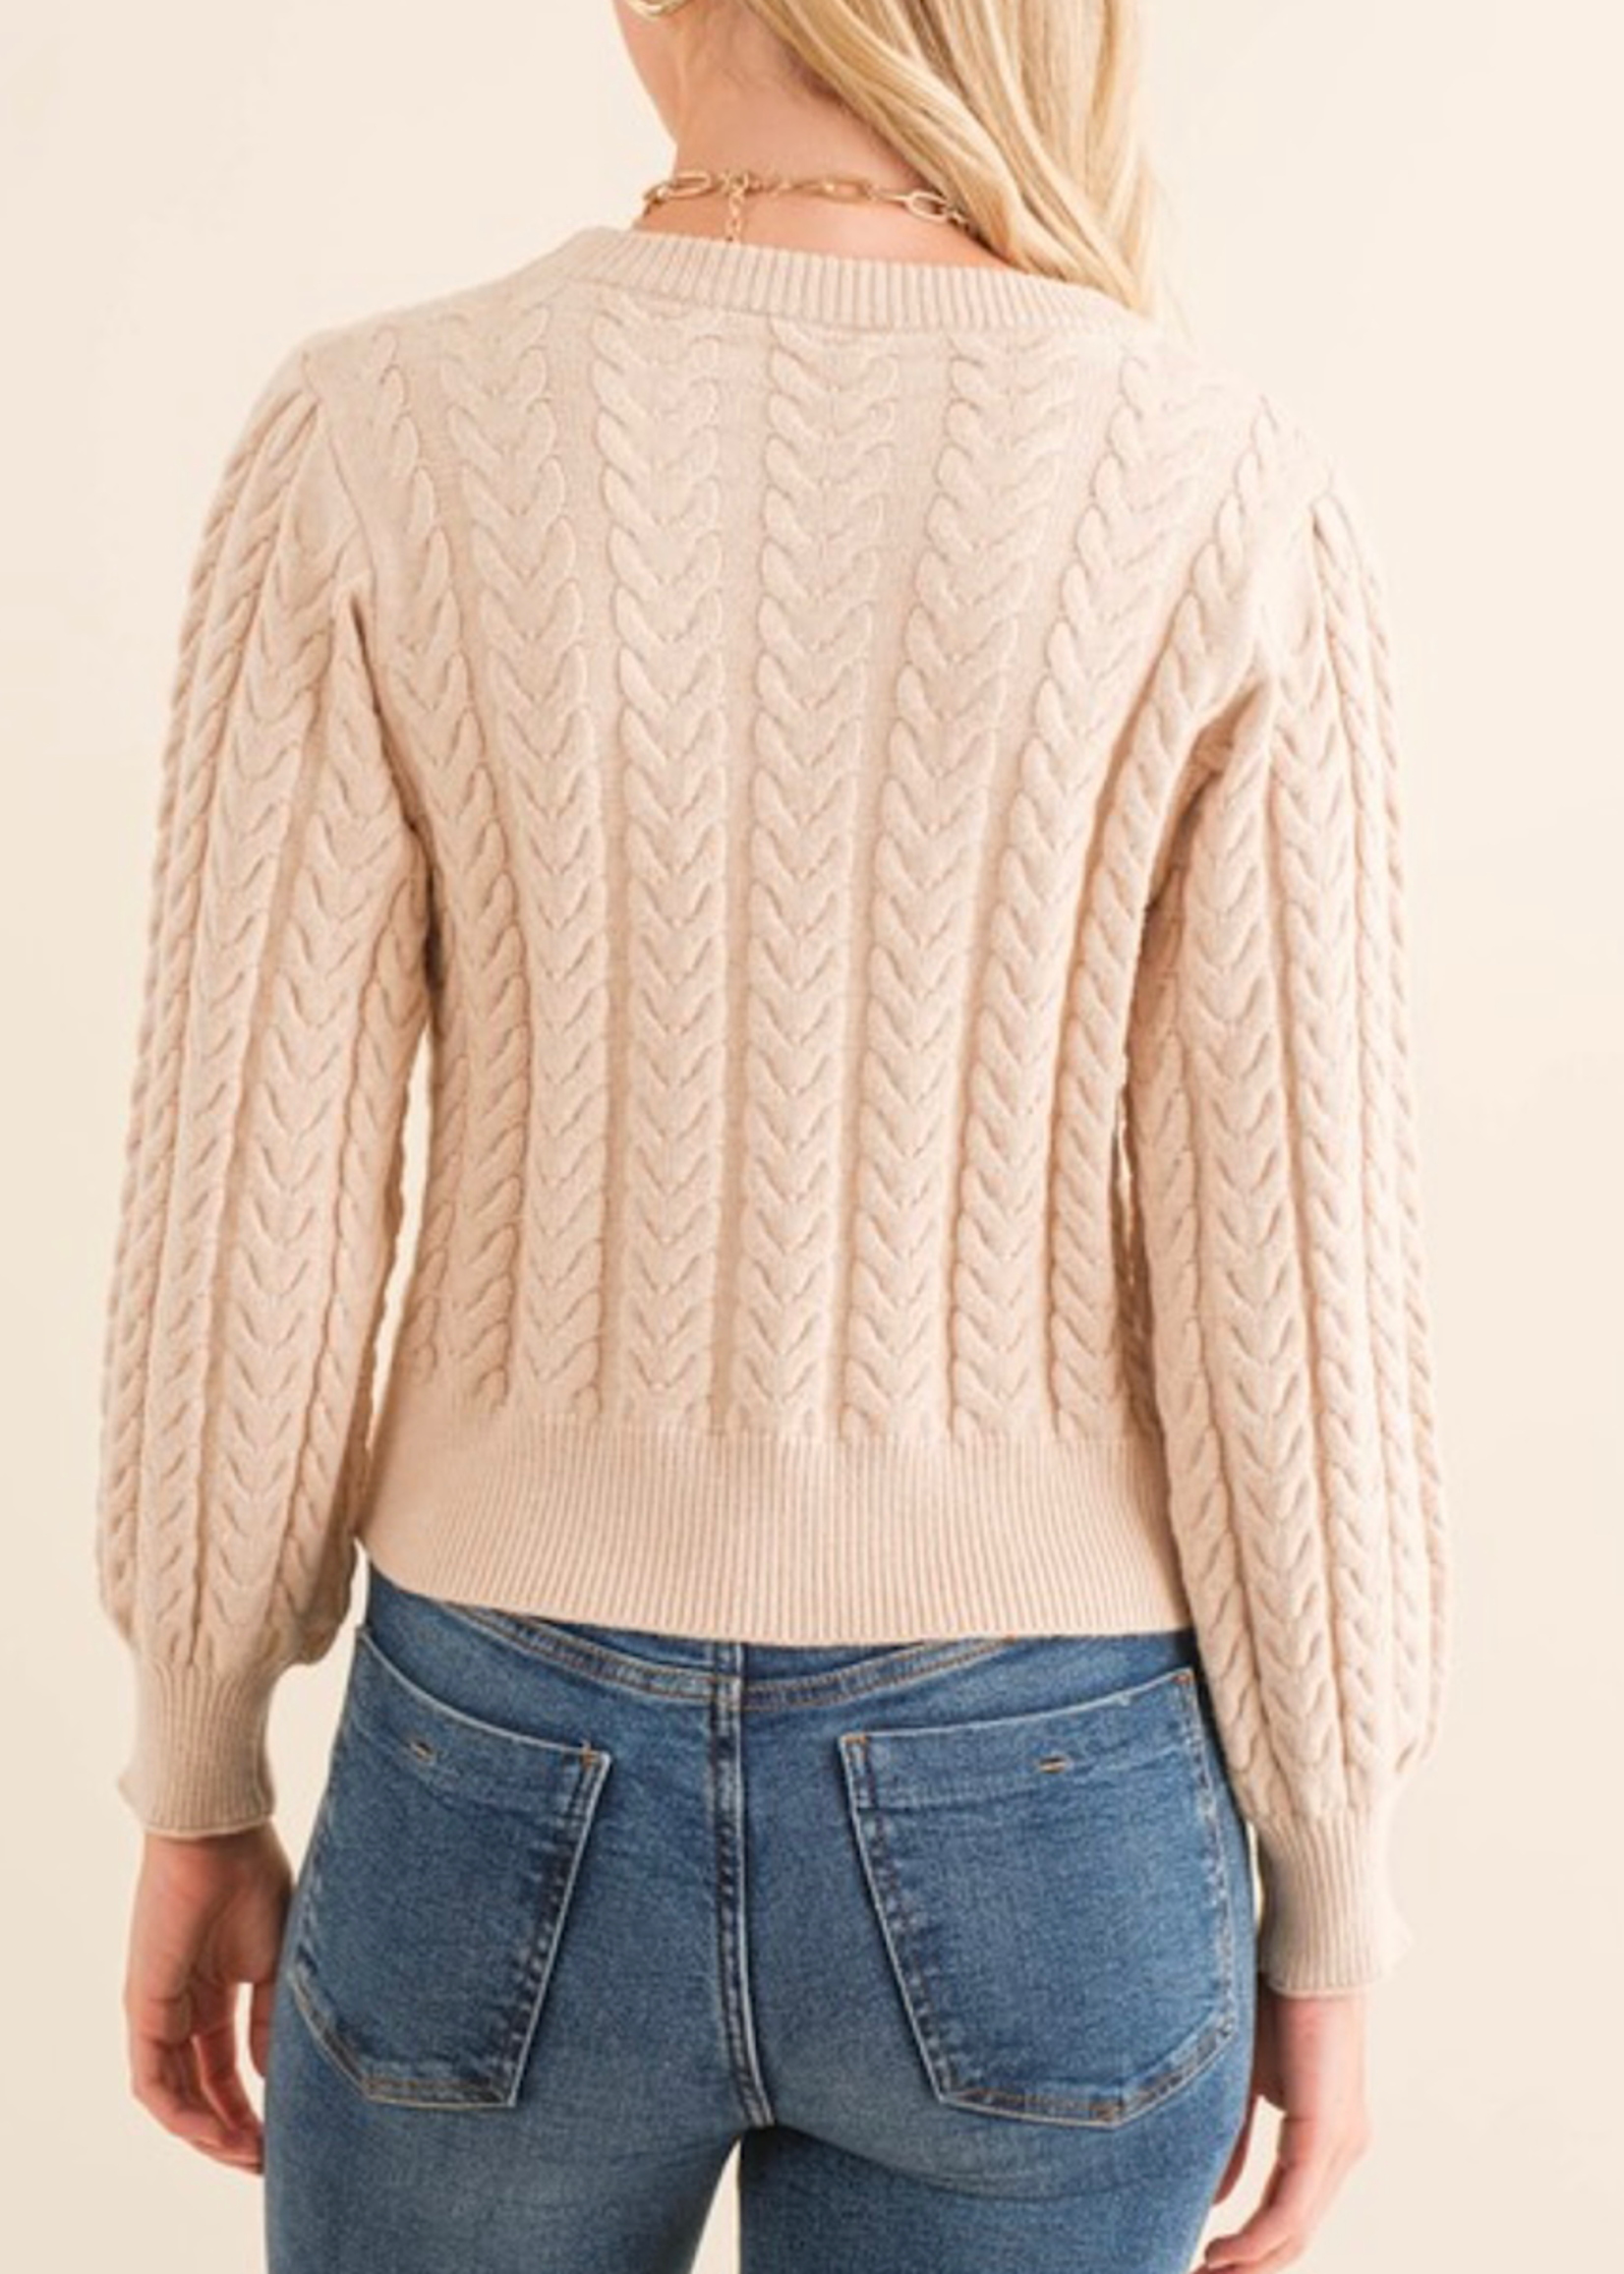 Oatmeal Soft Cable Knit Sweater